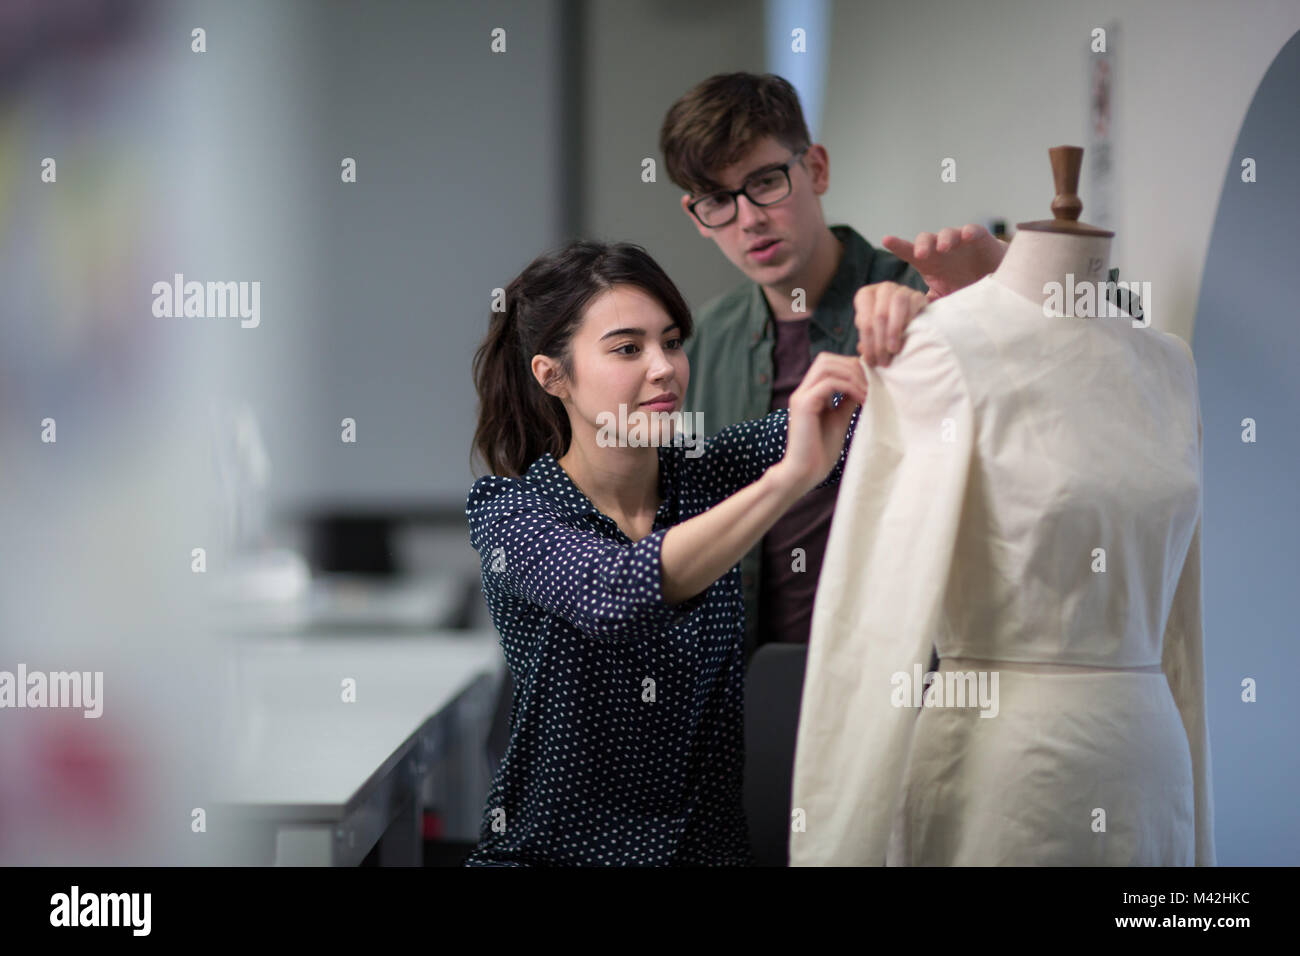 Fashion students working on a design together Stock Photo